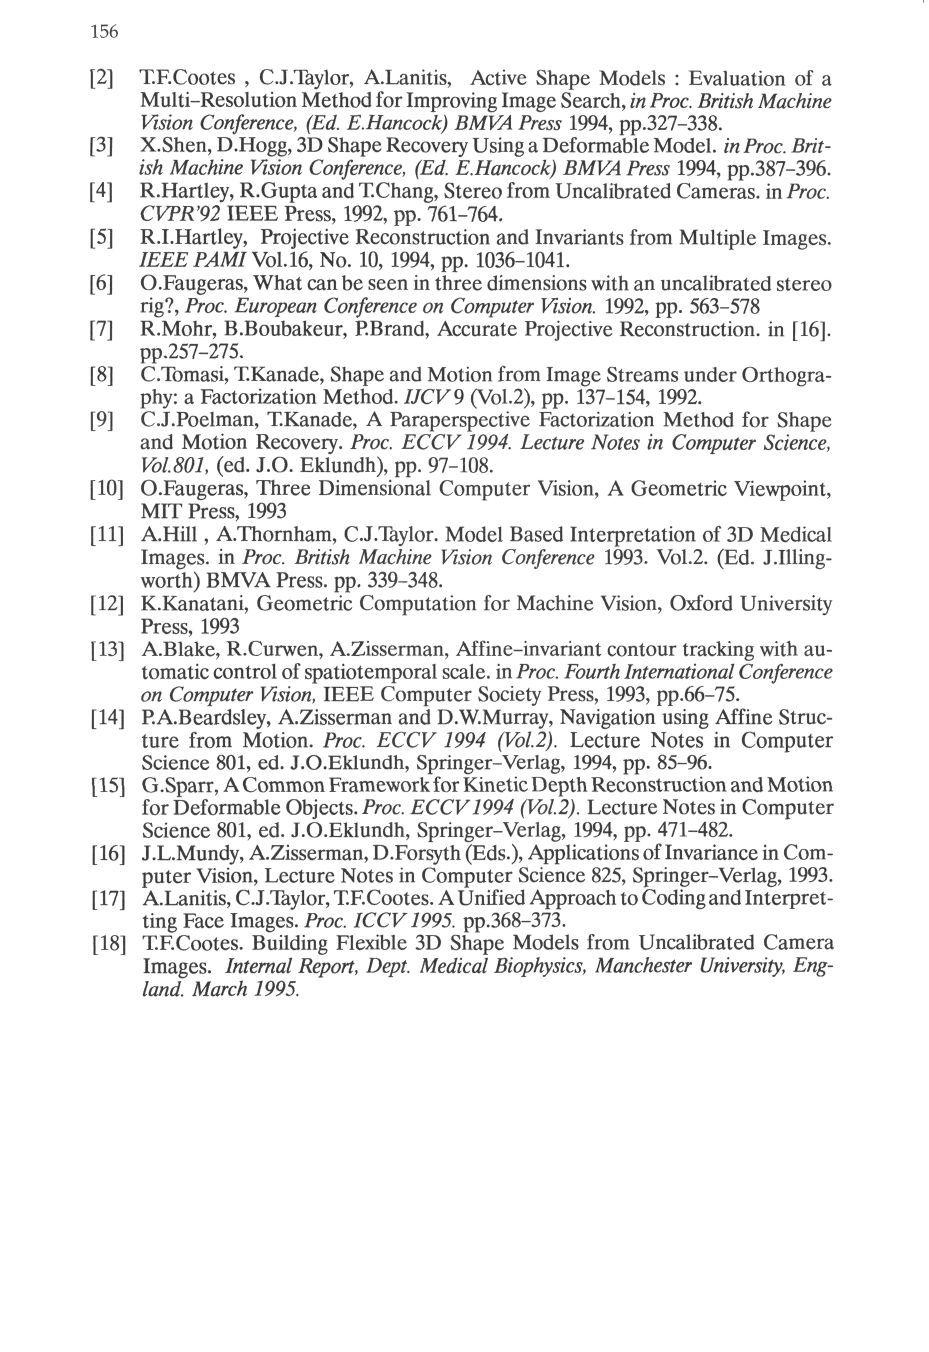 156 [2] T.F.Cootes, CJ.Taylor, A.Lanitis, Active Shape Models : Evaluation of a Multi-Resolution Method for Improving Image Search, in Proc. British Machine Vision Conference, (Ed. E.Hancock) BMVA Press 1994, pp.